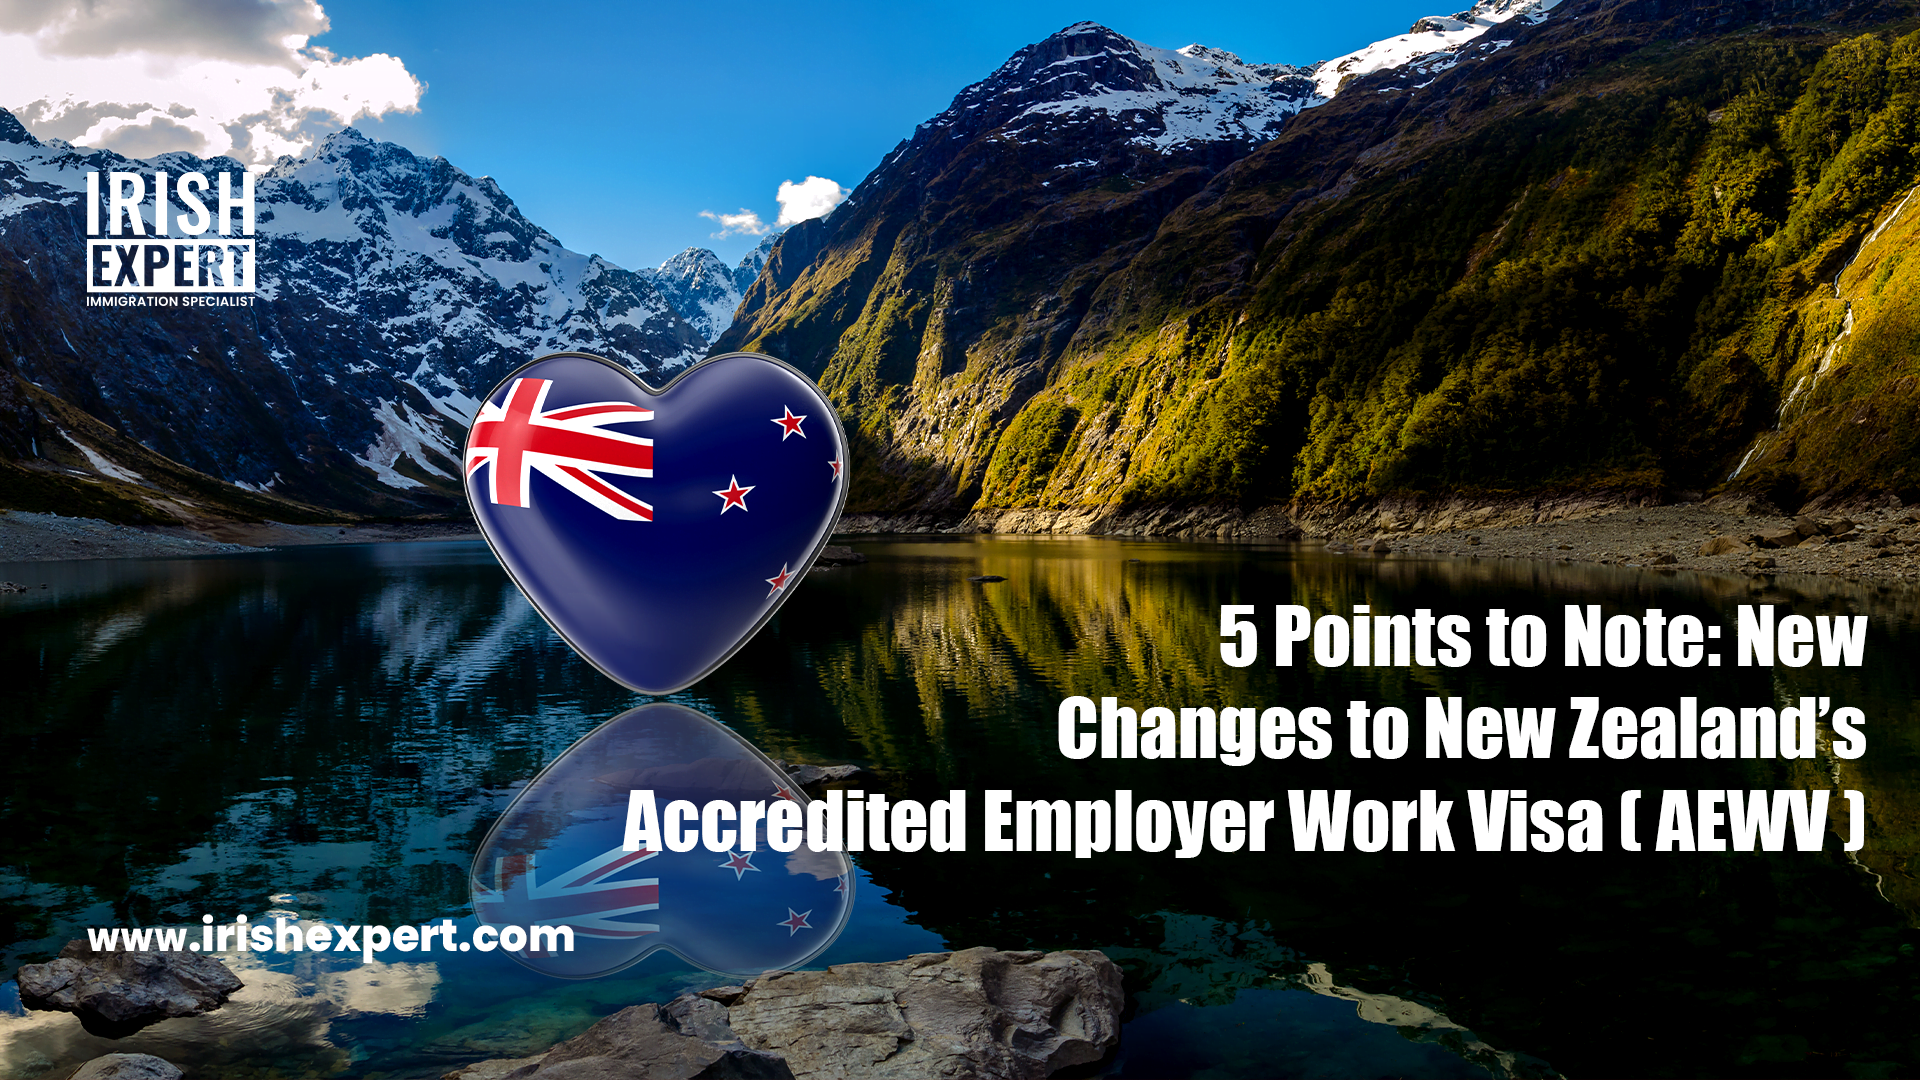 5 Points to Note: New Changes to New Zealand’s Accredited Employer Work Visa(AEWV)